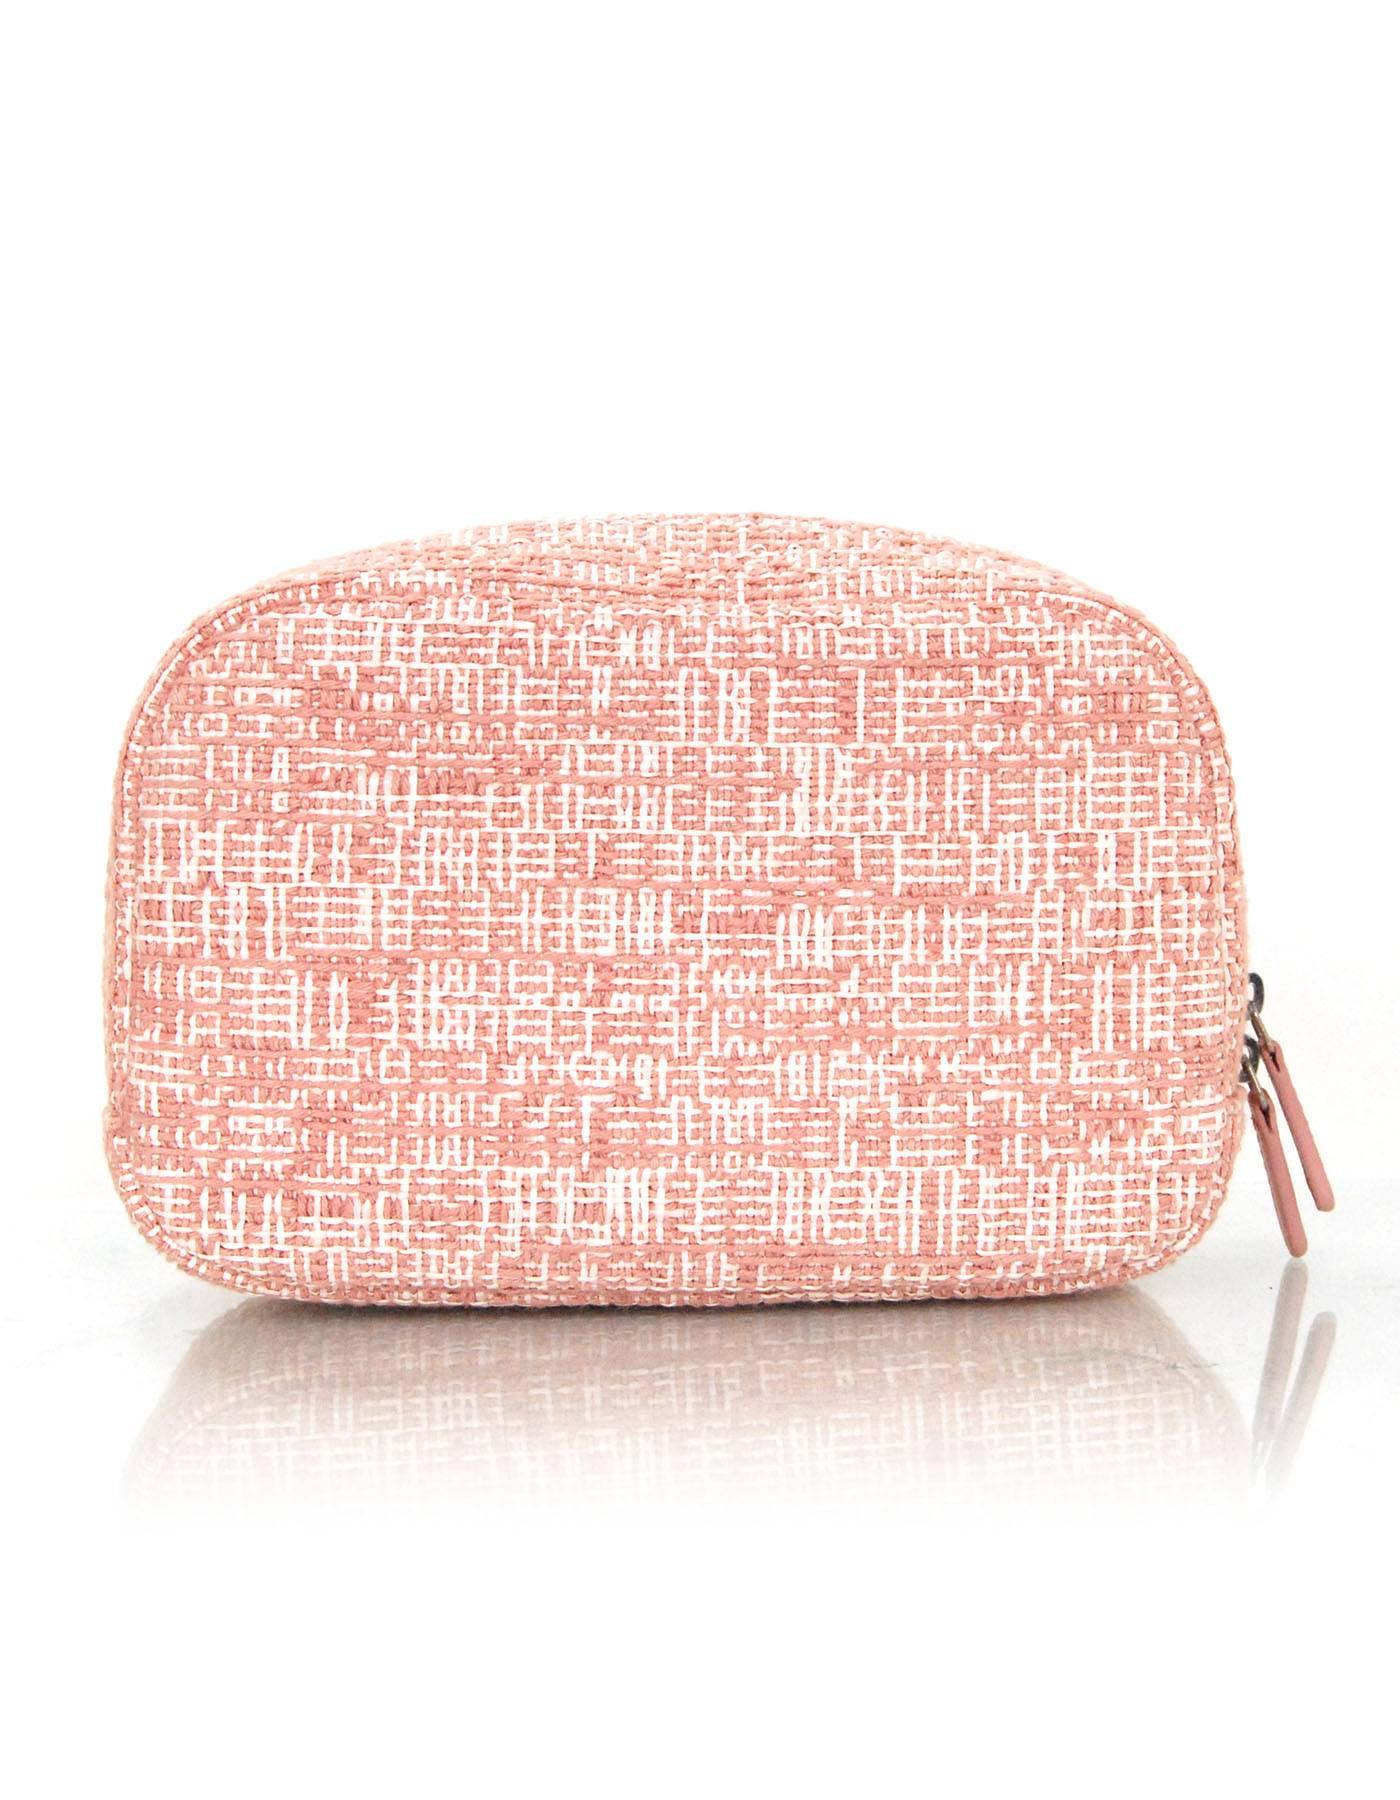 Chanel Pink Cruise Deauville Zip O-Case Travel Pouch
Features glitter chanel logo at front

Made In: Italy
Year of Production: 2018
Color: Pink
Hardware: Silvertone
Materials: Woven canvas
Lining: Pink textile
Closure/Opening: Double zip top